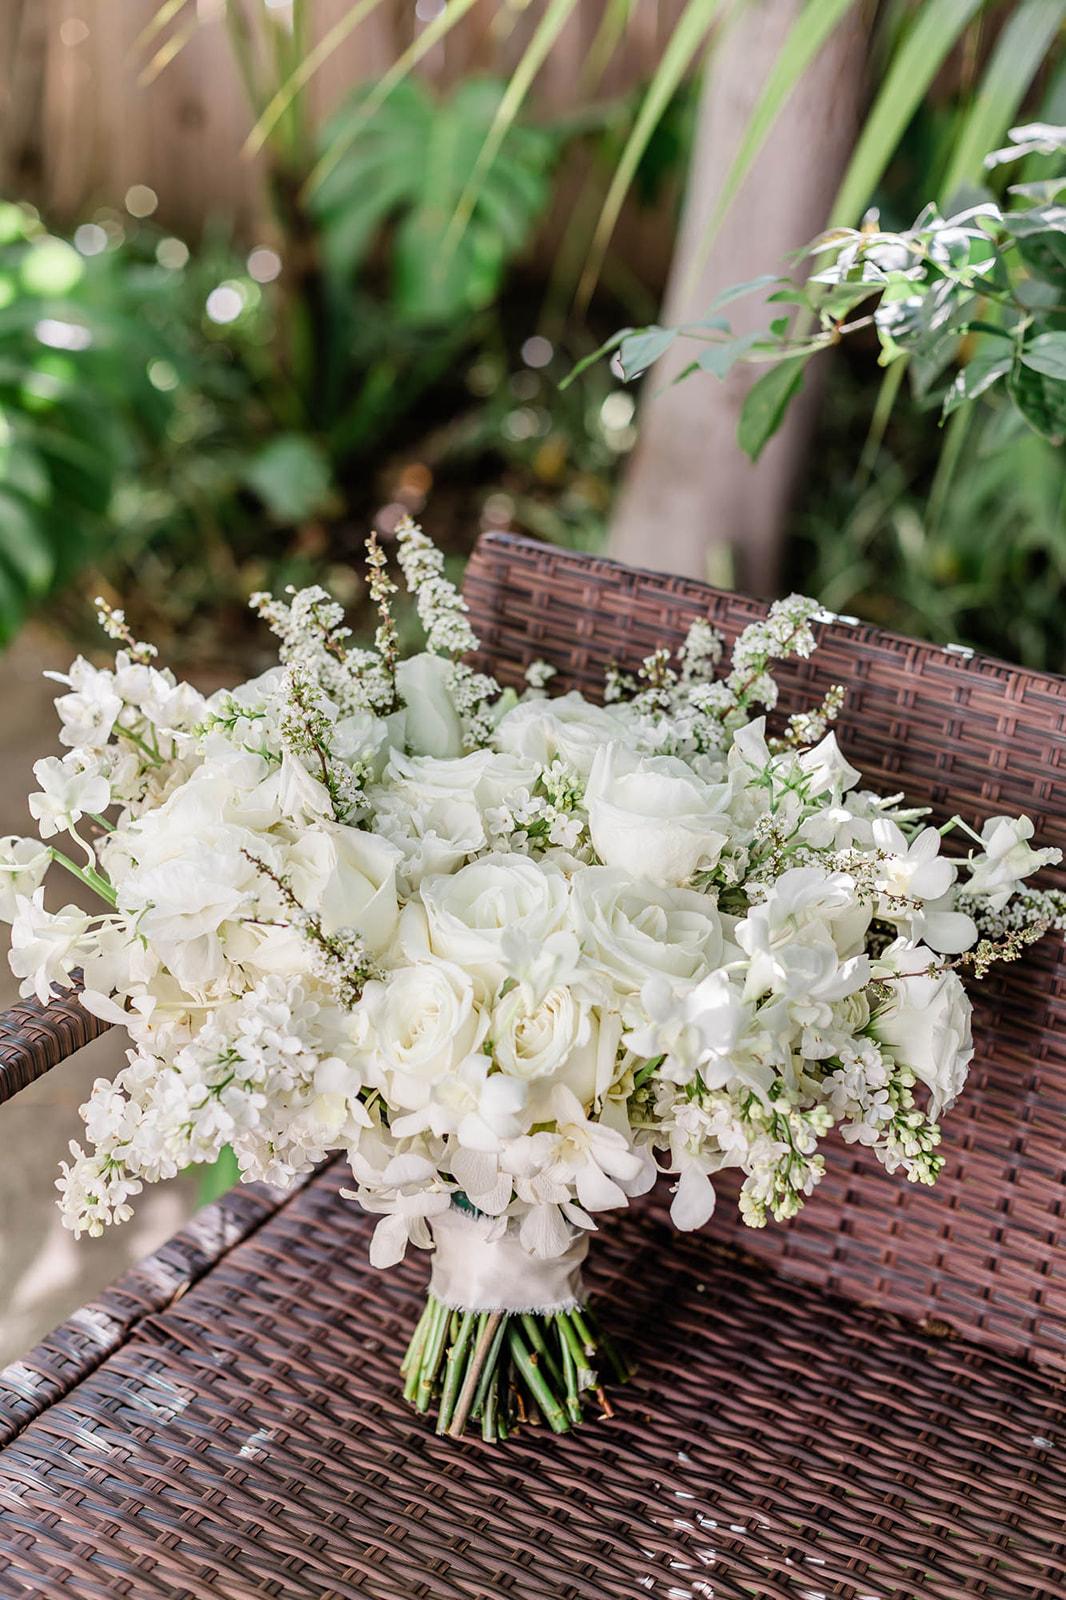 Bridal bouquet from Vibe Florals for garden wedding at Hartley Botanica in Somis, CA.